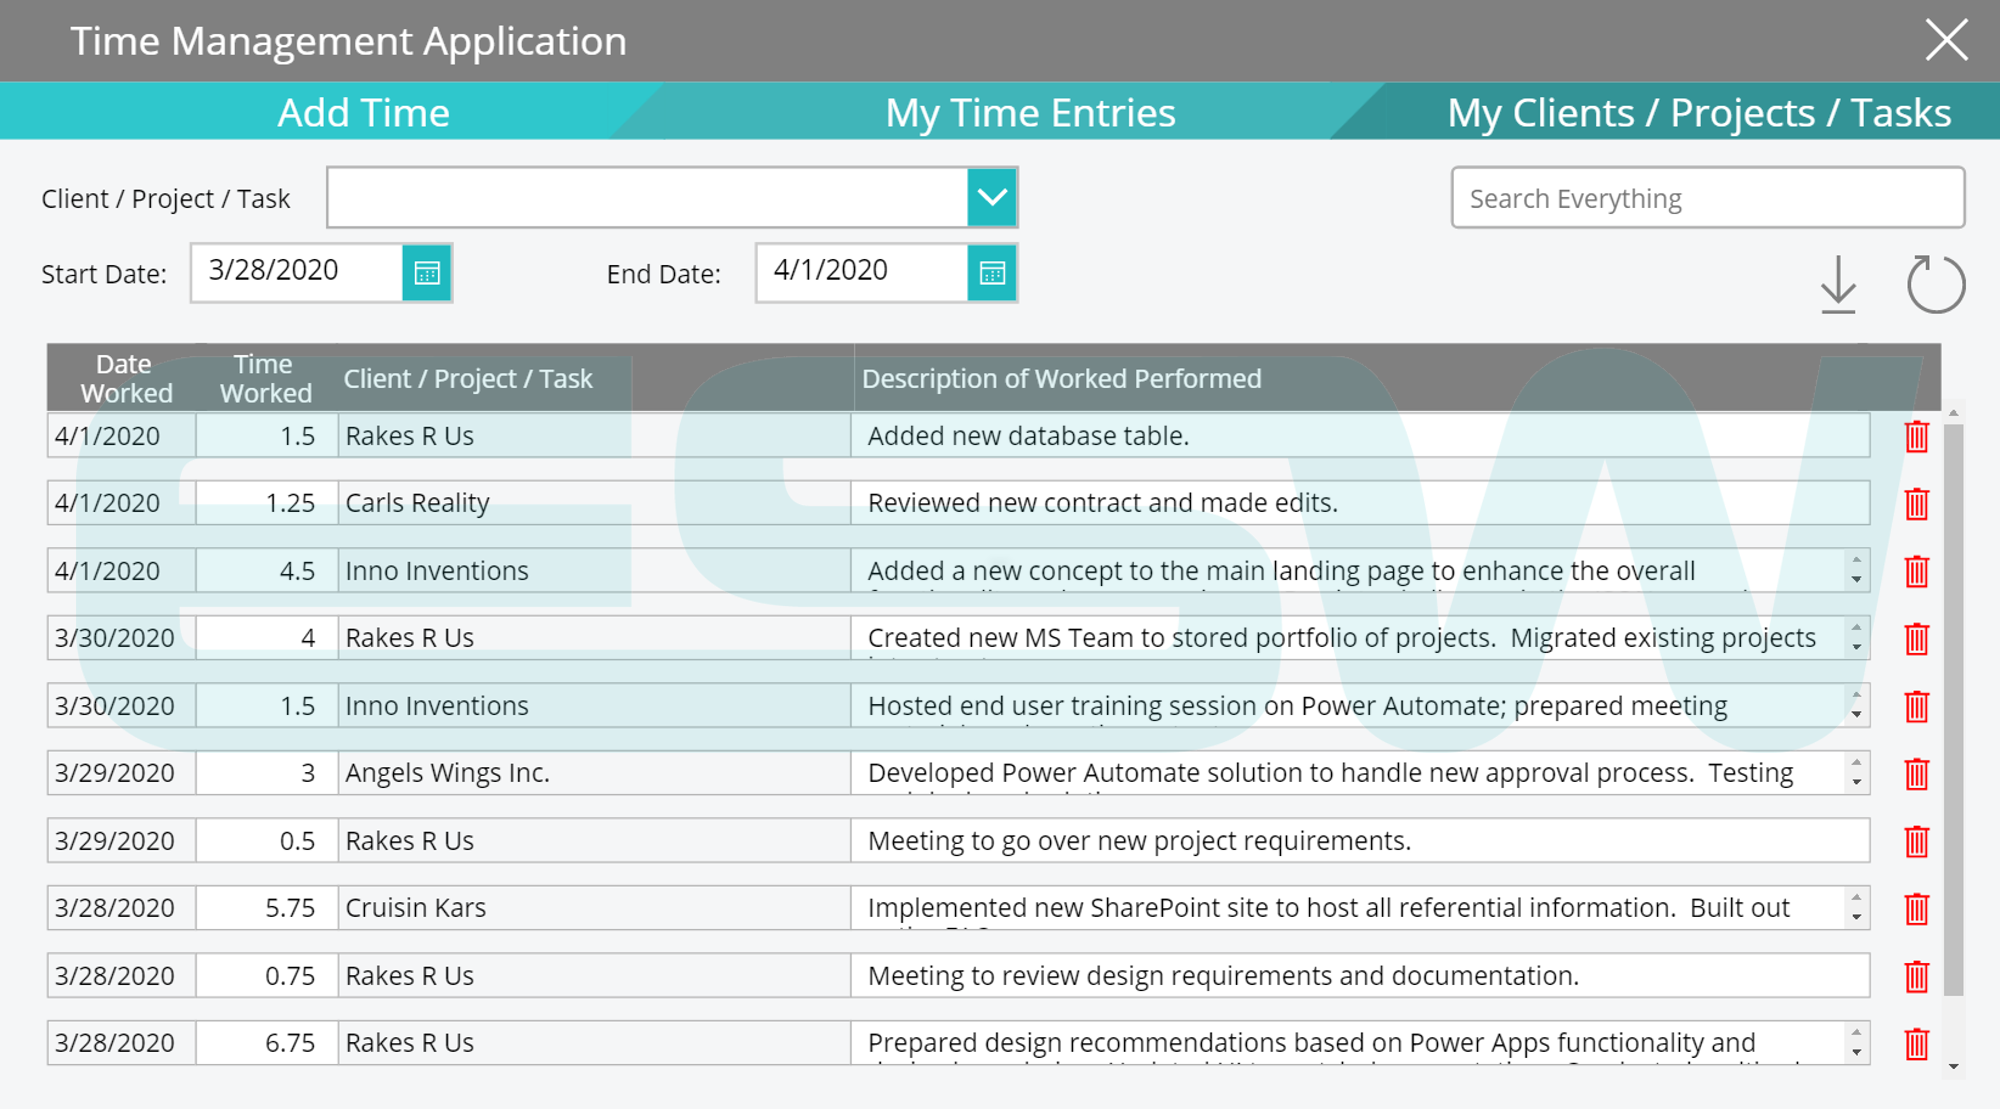 An example of Managing Time Entries with Microsoft Power Apps